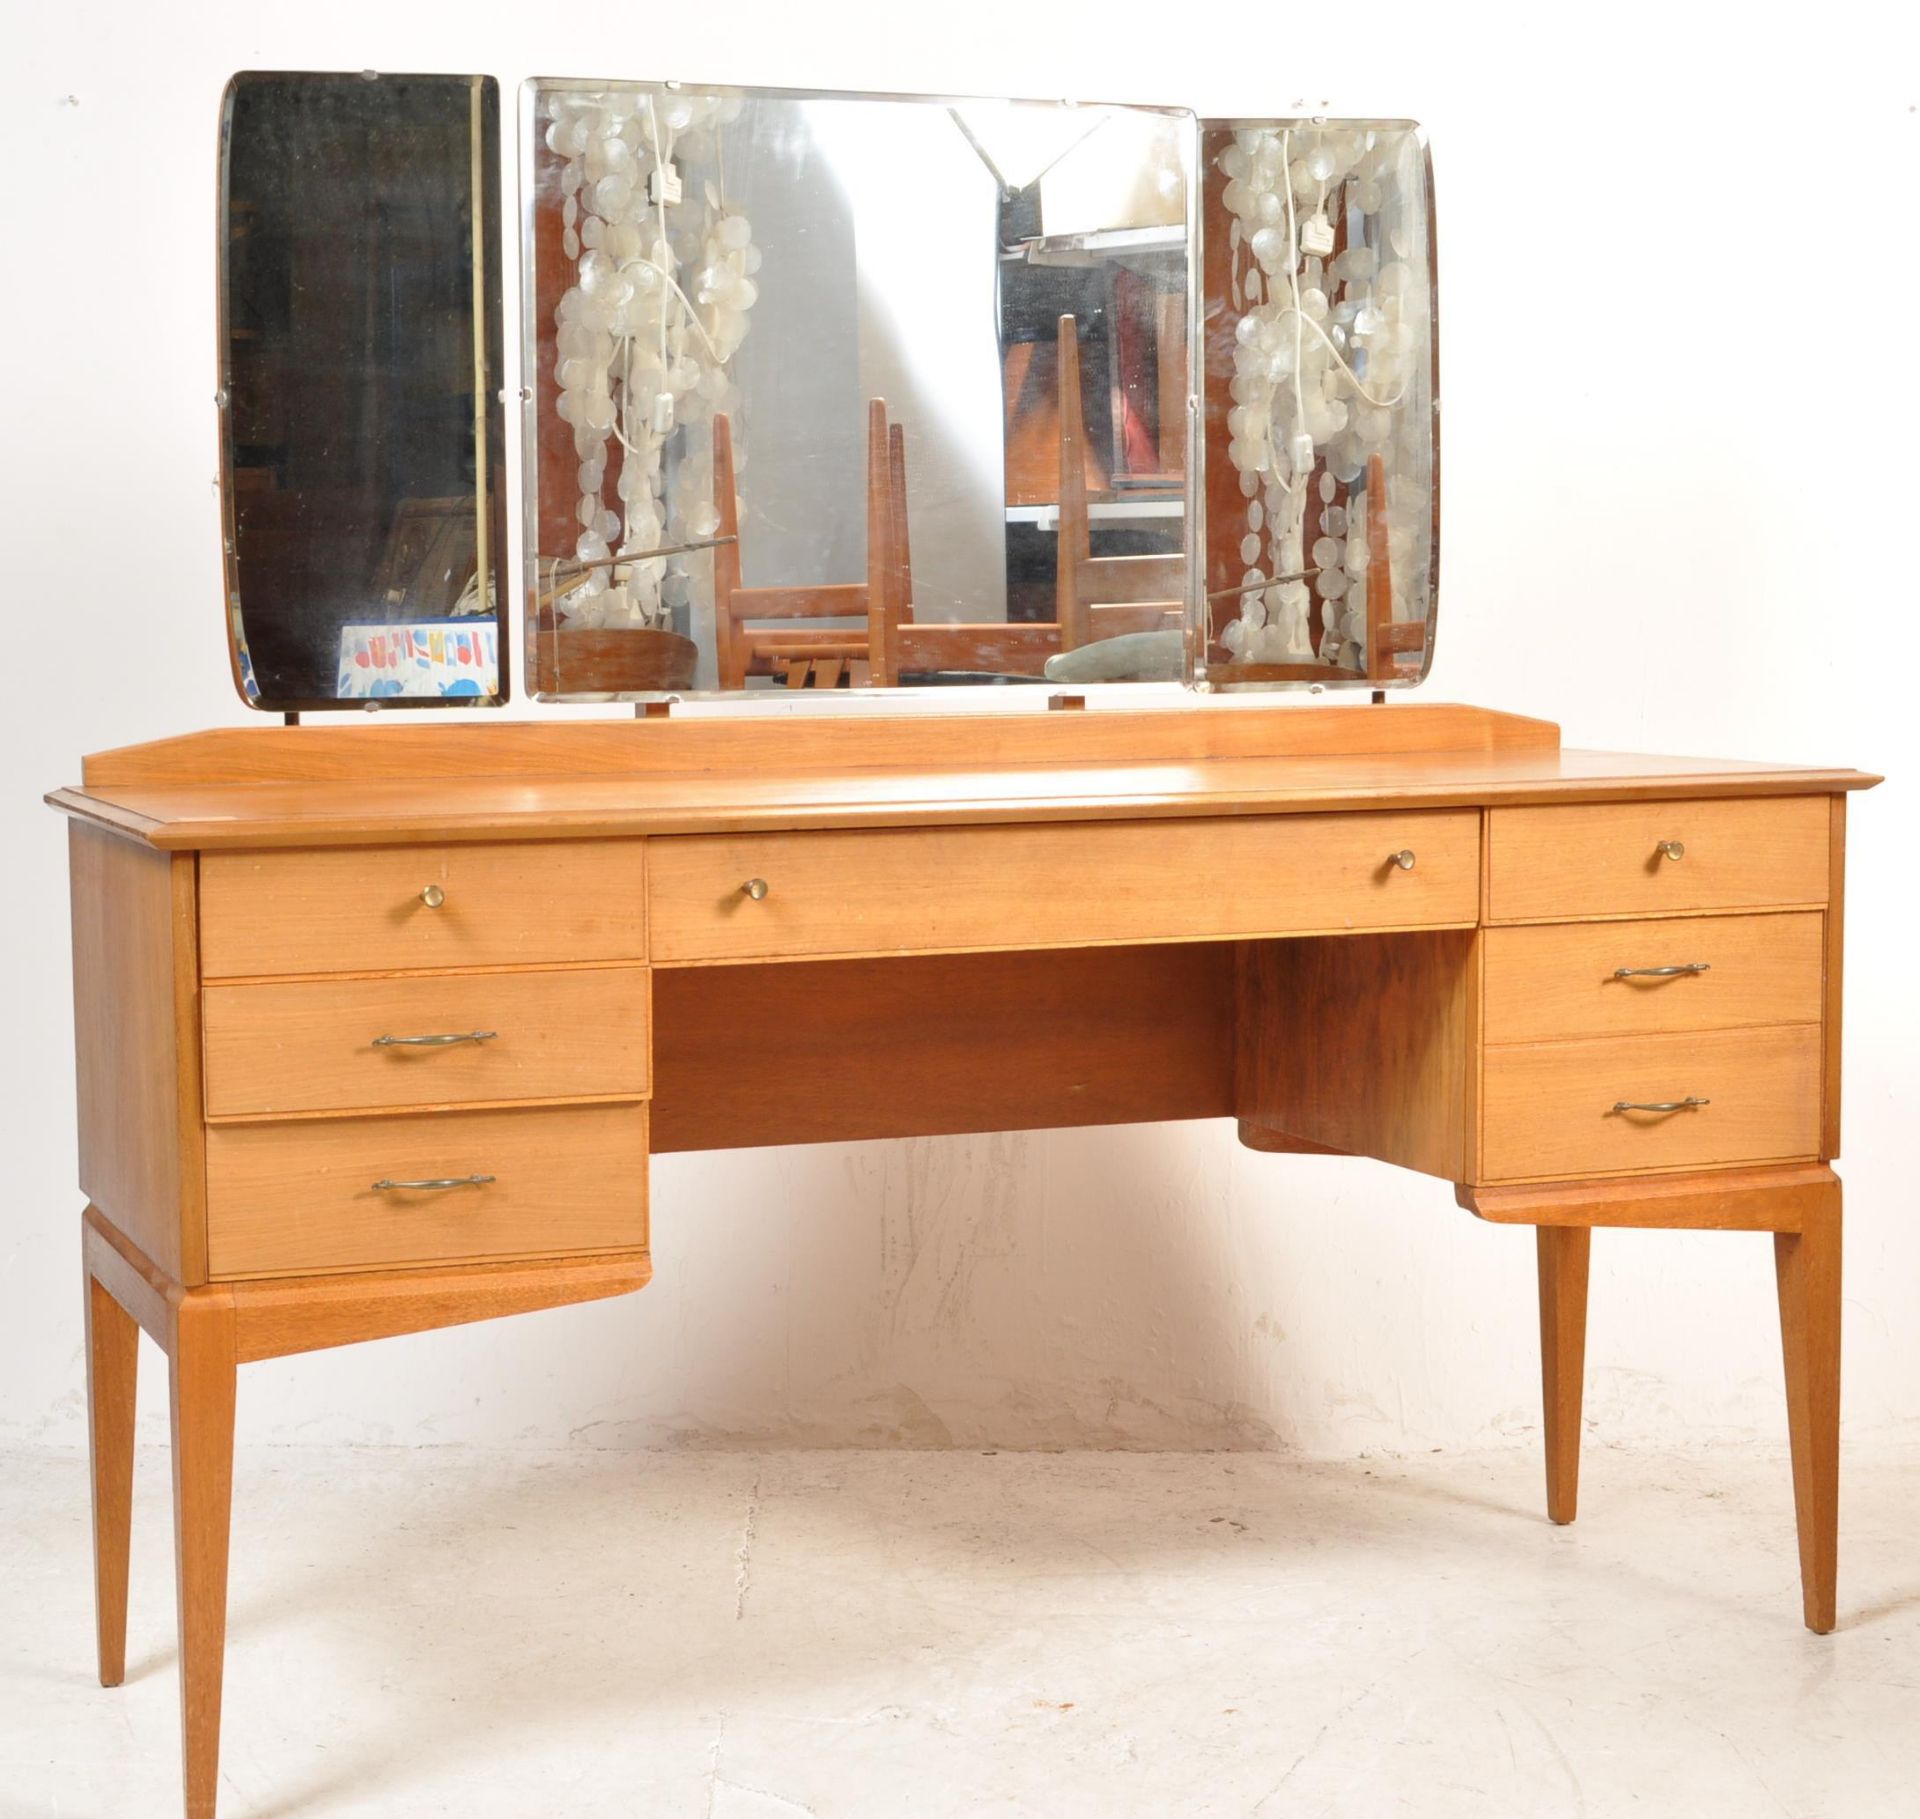 MID 20TH CENTURY ALFRED COX TEAK WOOD DRESSING TABLE - Image 2 of 9